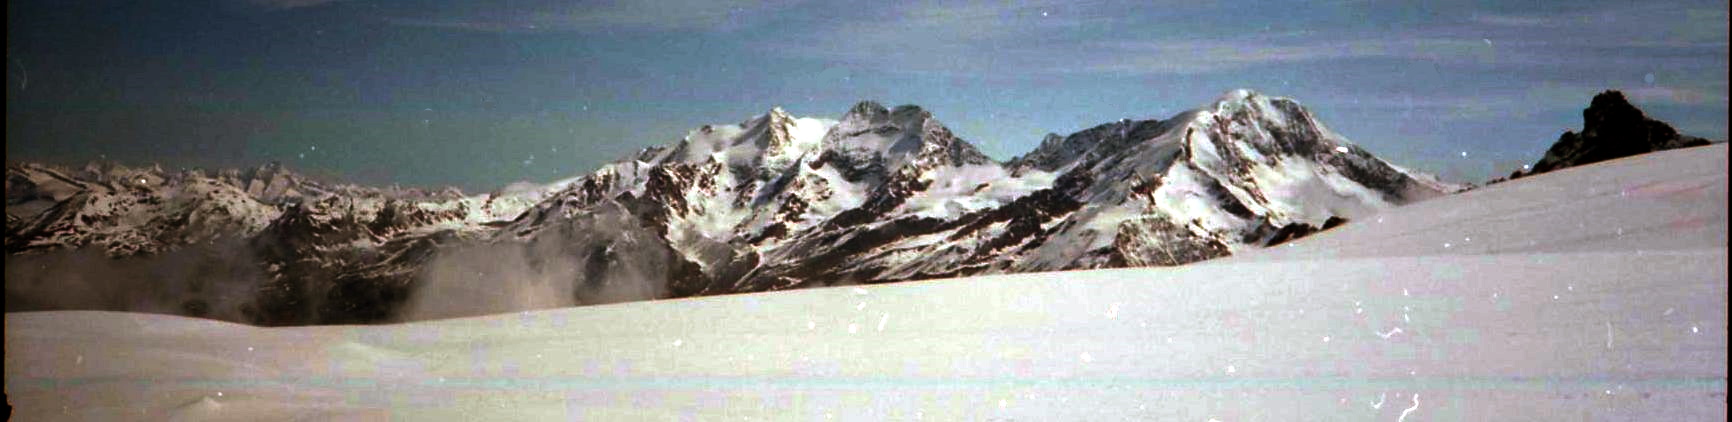 Lagginhorn and Weissmies from above Saas Fe